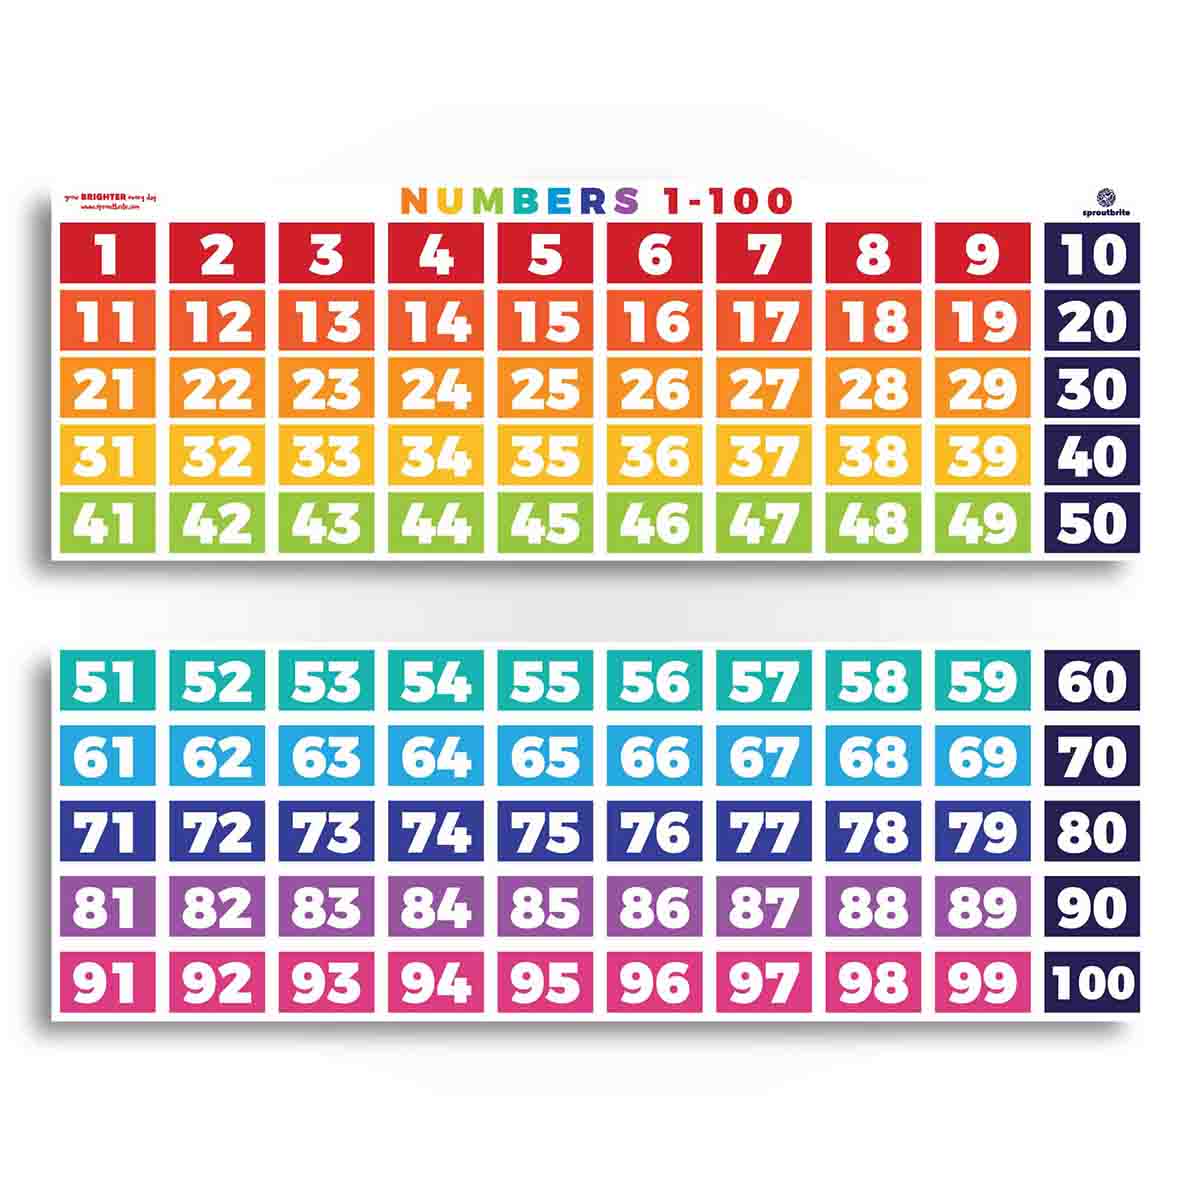 Numbers 1-100 Counting Chart | Sproutbrite